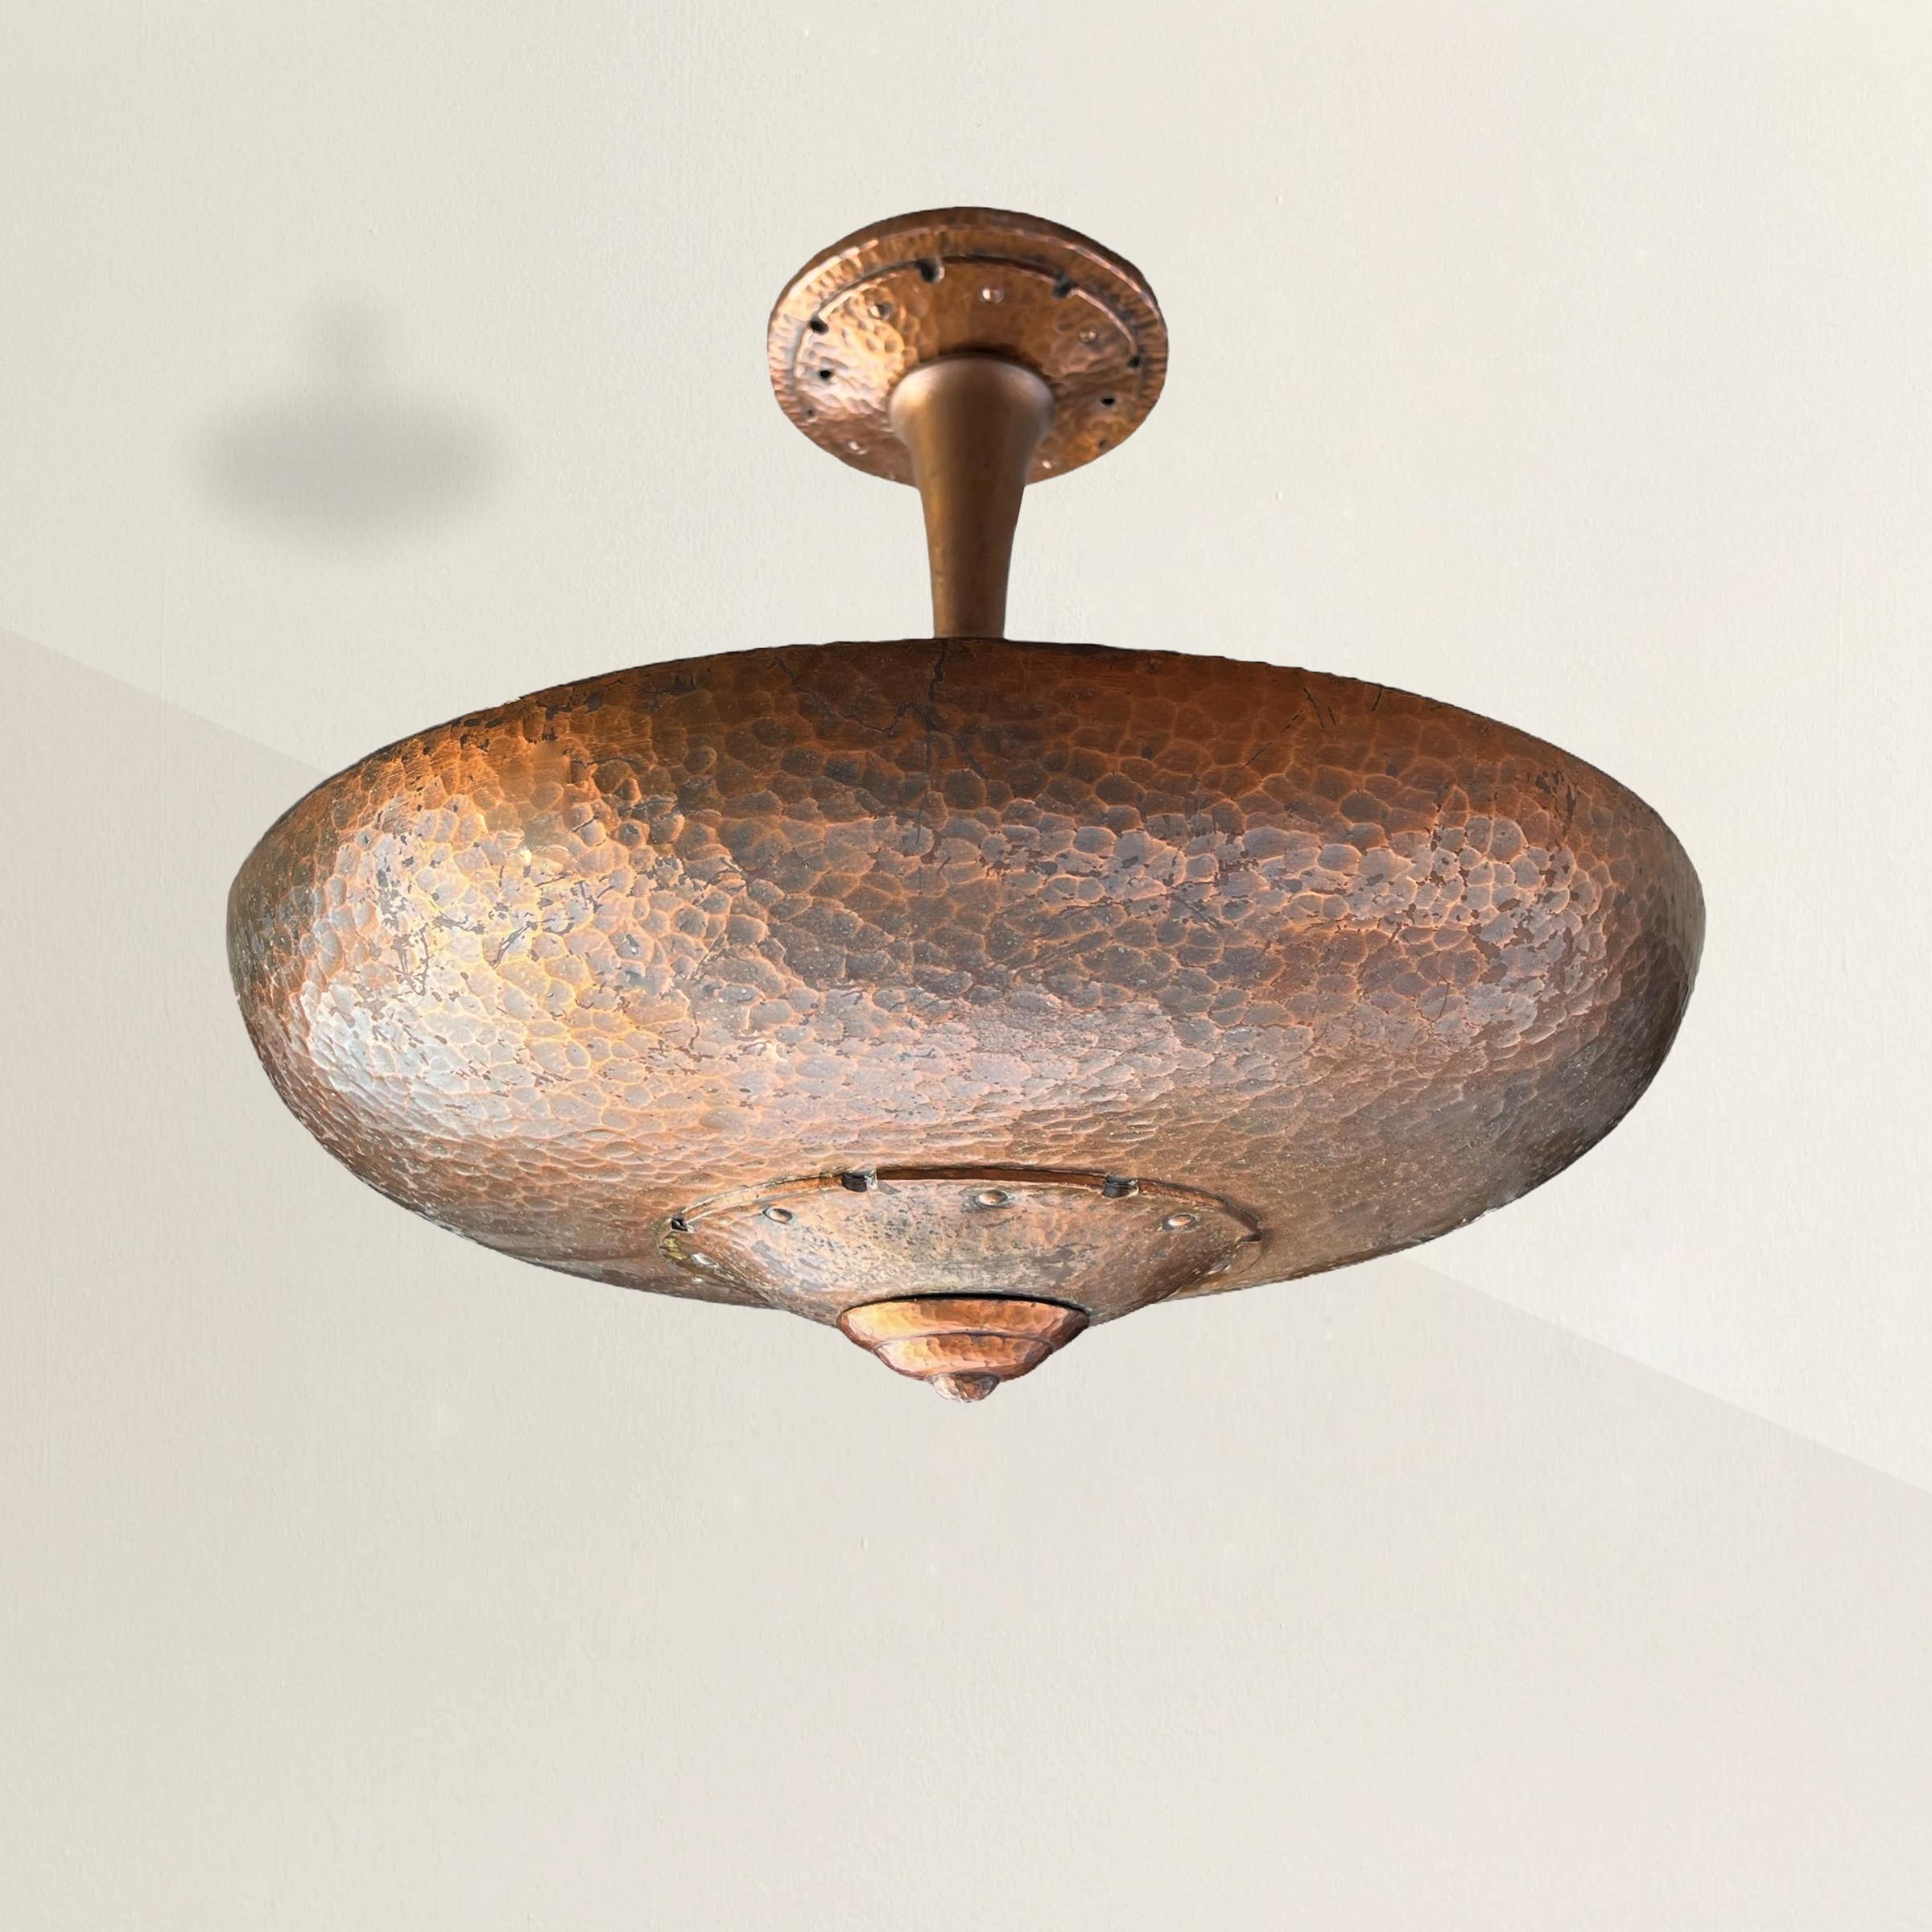 Celebrate the timeless allure of early 20th century industrial design with this stunning American Art Deco ceiling mounted uplight. Crafted with flair, its hammered copper shade suspended from a matching downrod exudes timeless elegance. The